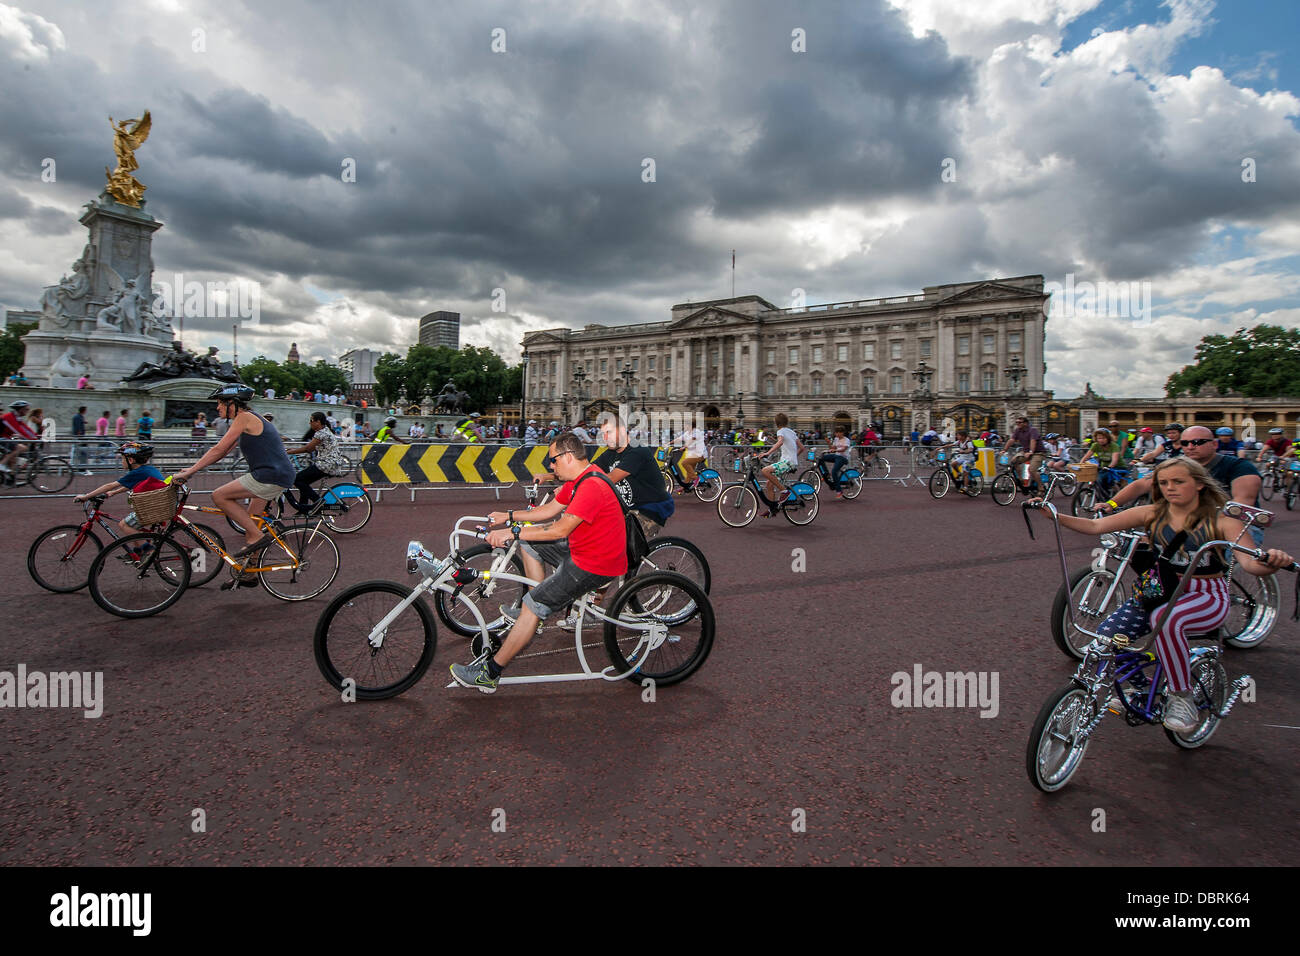 London, UK. 3rd August, 2013. Cyclists of all ages enjoy the summer weather as they pass Buckingham Palace as part of the Prudential RideLondon taking place over the weekend of Saturday 3 August 2013. Buckingham Palace, London UK. Credit:  Guy Bell/Alamy Live News Stock Photo